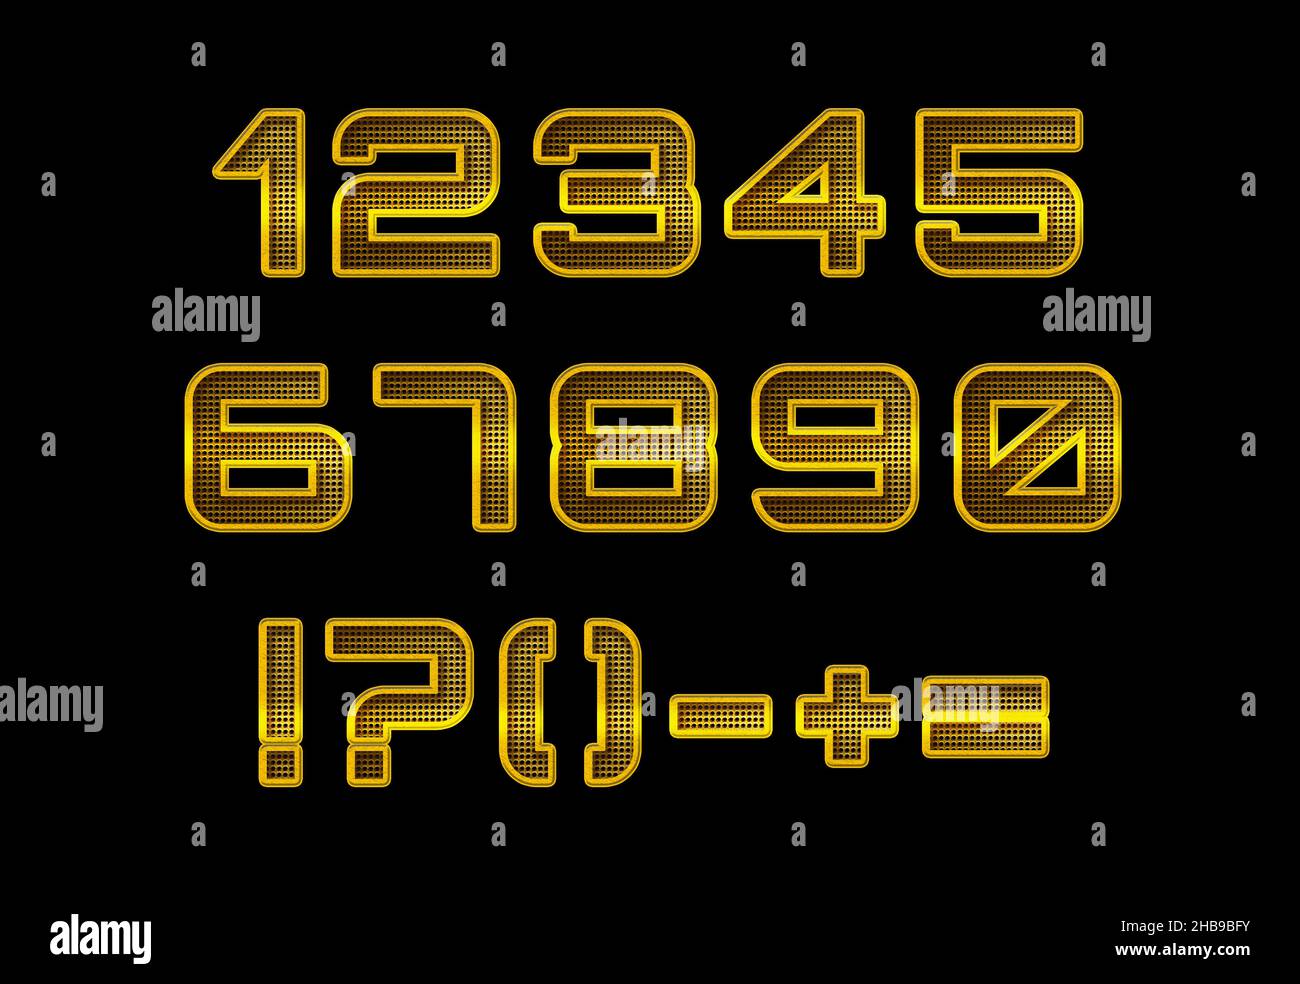 Perforated golden metal set of numbers (1234567890), yellow metal numbers, isolated over the black background Stock Photo